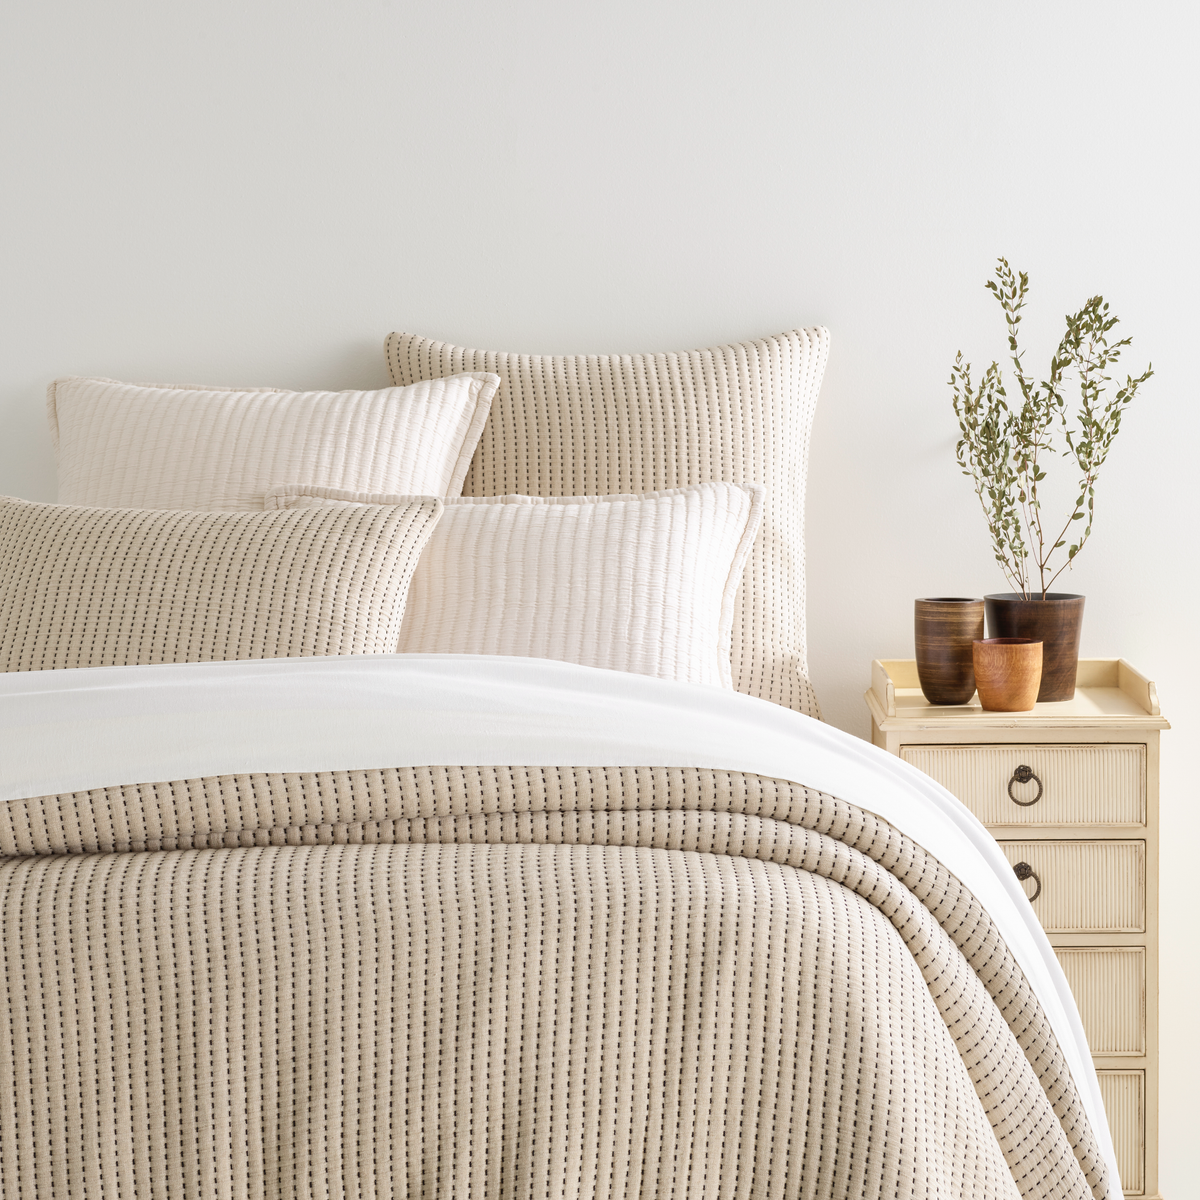 Bed Dressed in Natural Pine Cone Hill Pick Stitch Matelassé Coverlet &amp; Shams